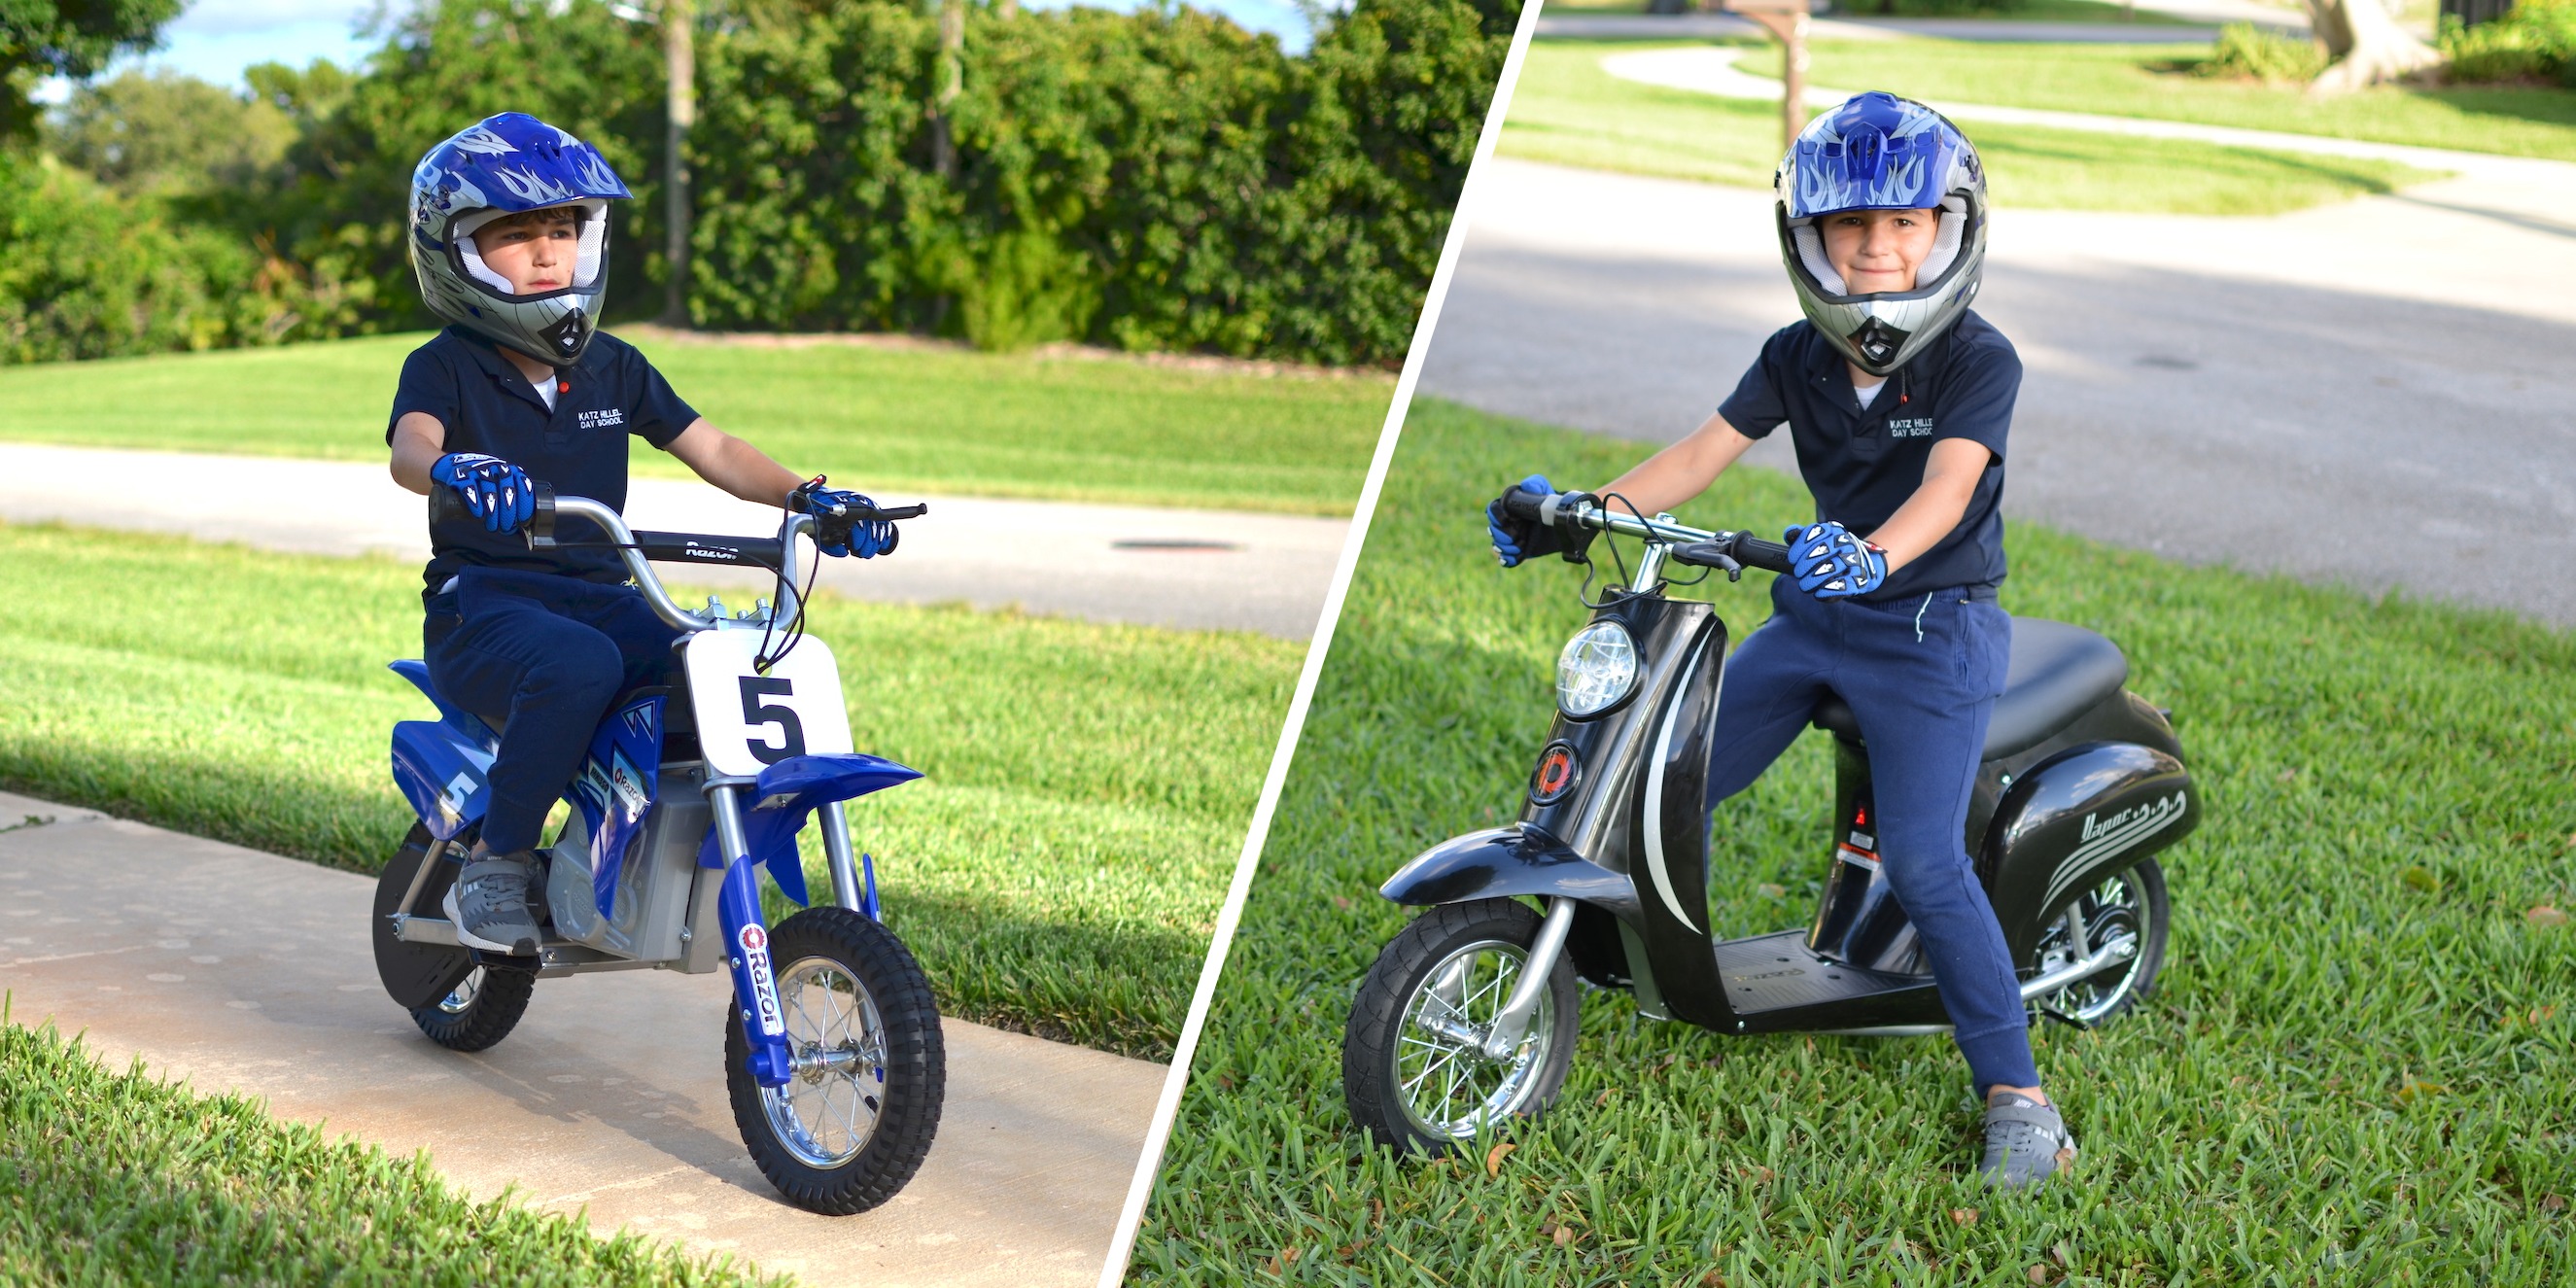 motorized motorcycle for 5 year old